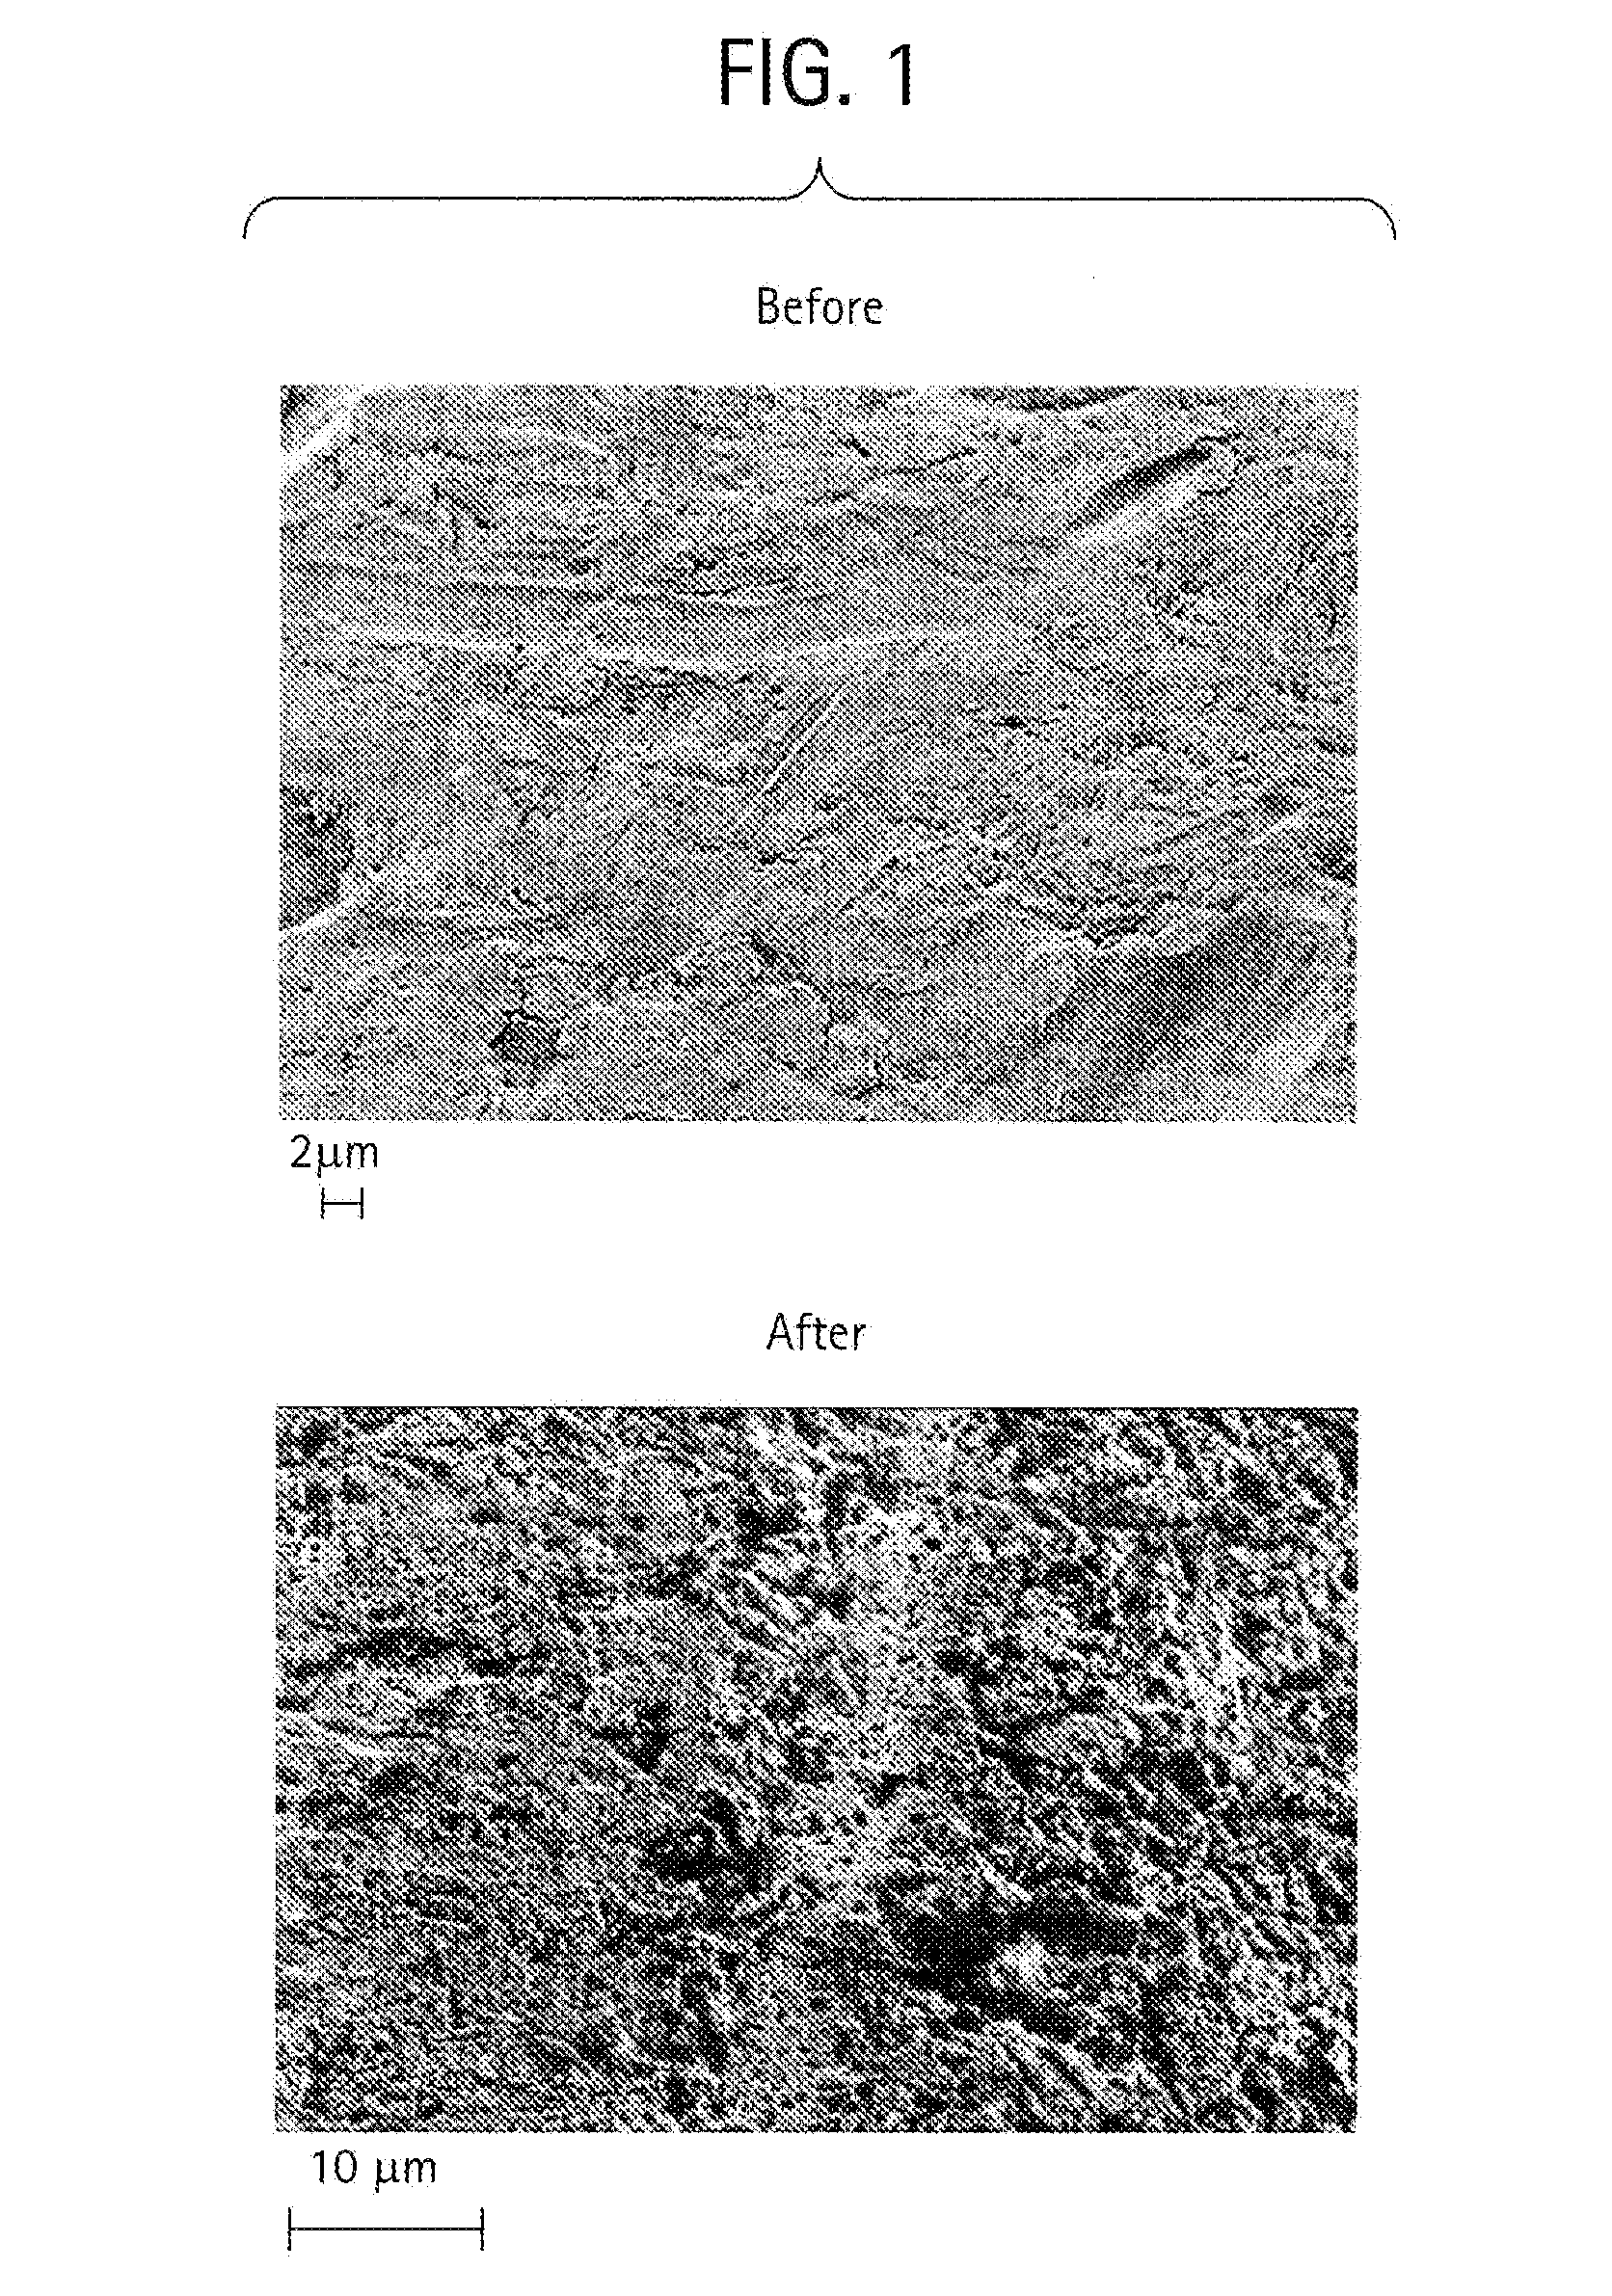 Surface Treatments for Turbine Components to Reduce Particle Accumulation During Use Thereof